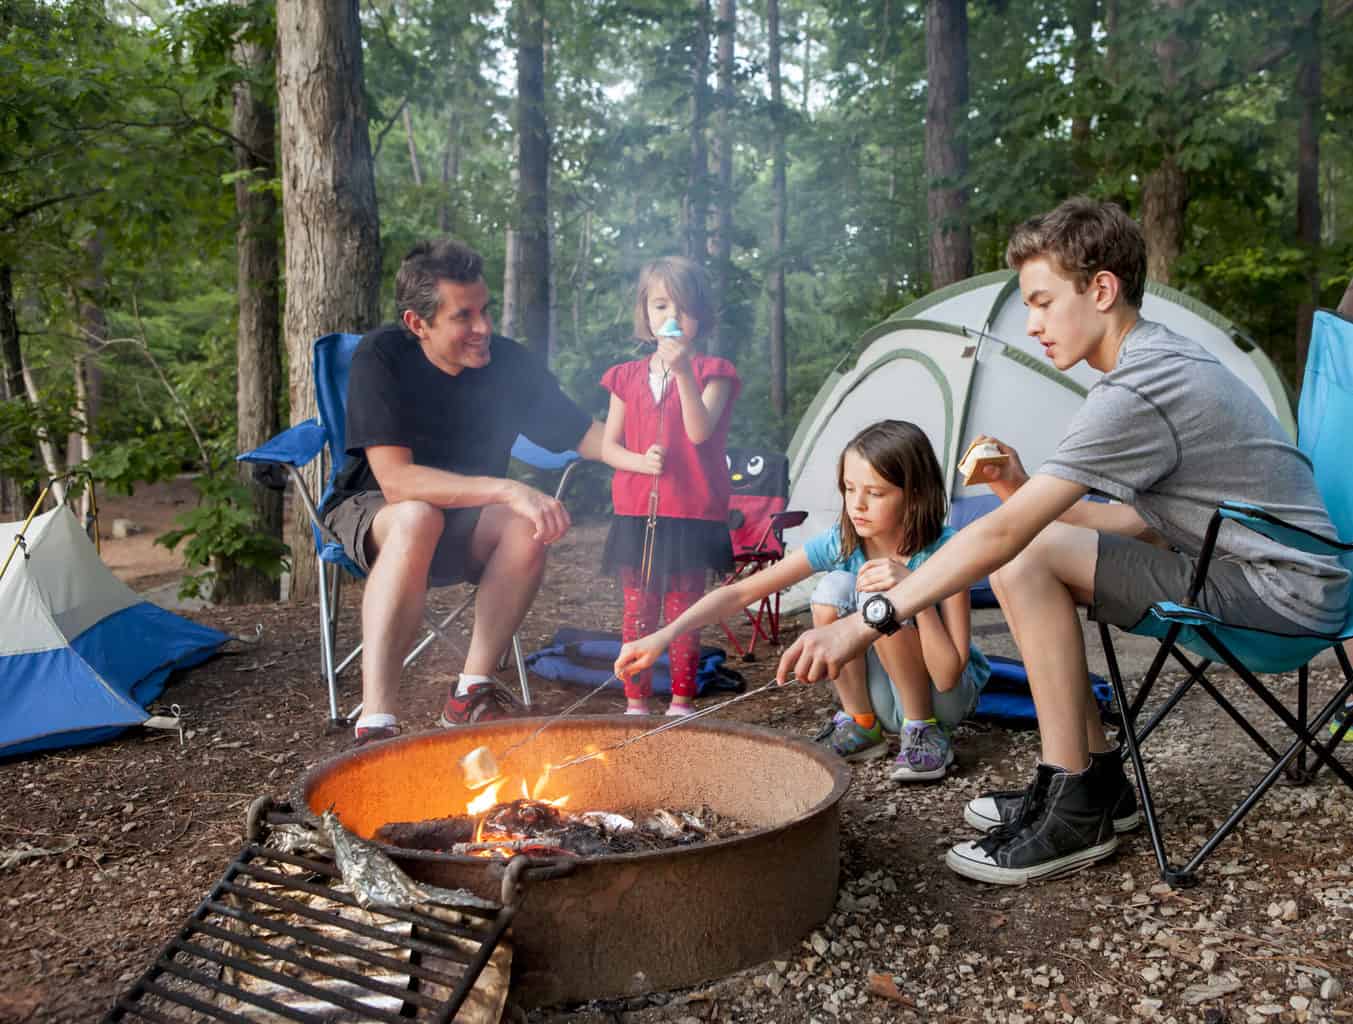 Safety Tips for Camping with Kids